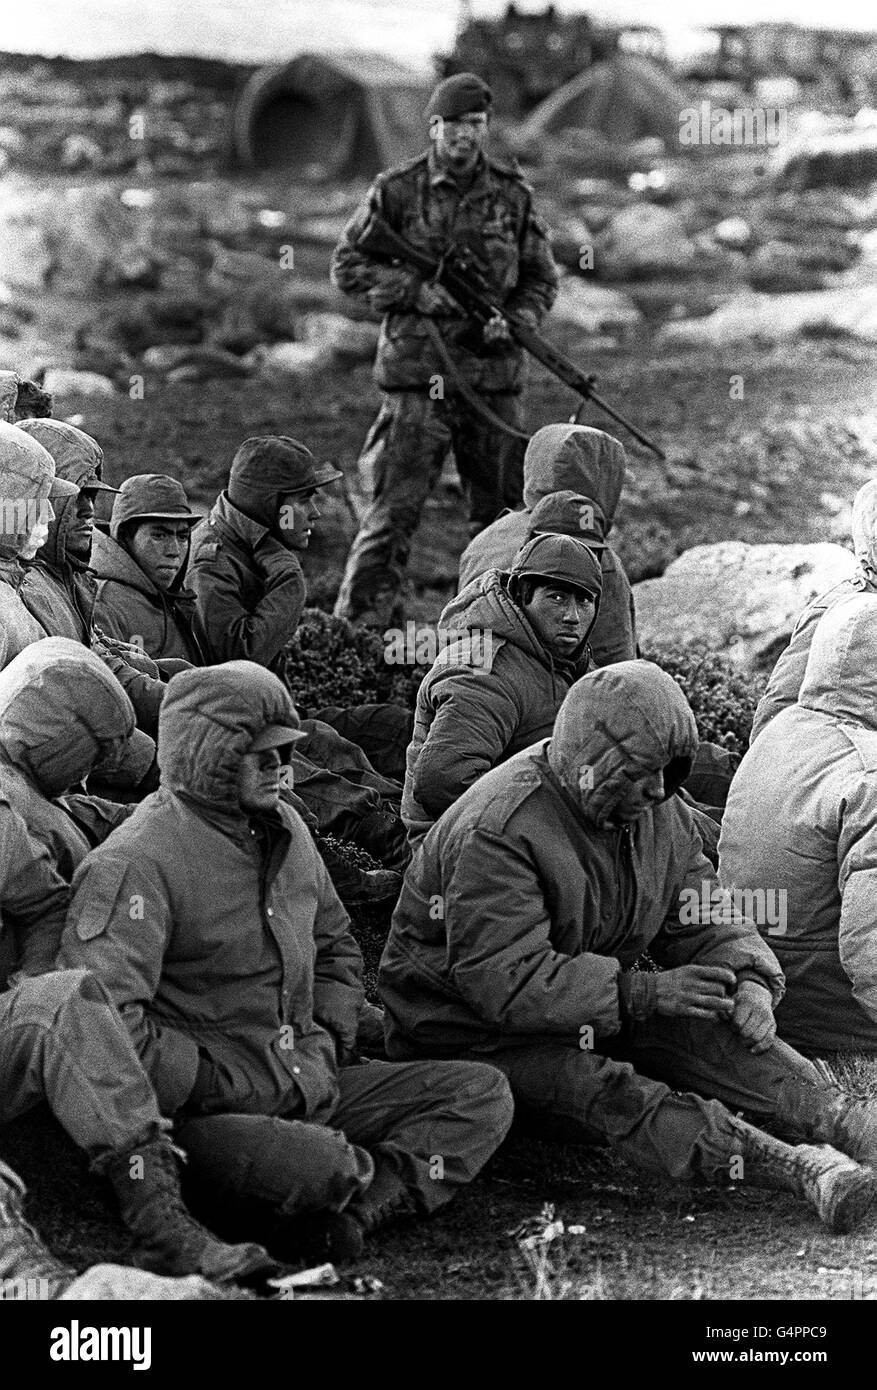 THE FALKLANDS WAR: Argentinian soldiers captured at Goose Green are guarded by a Royal Marine as they await transit out of the area. Goose Green was captured by men of the Parachute Regiment (2 Para). Stock Photo